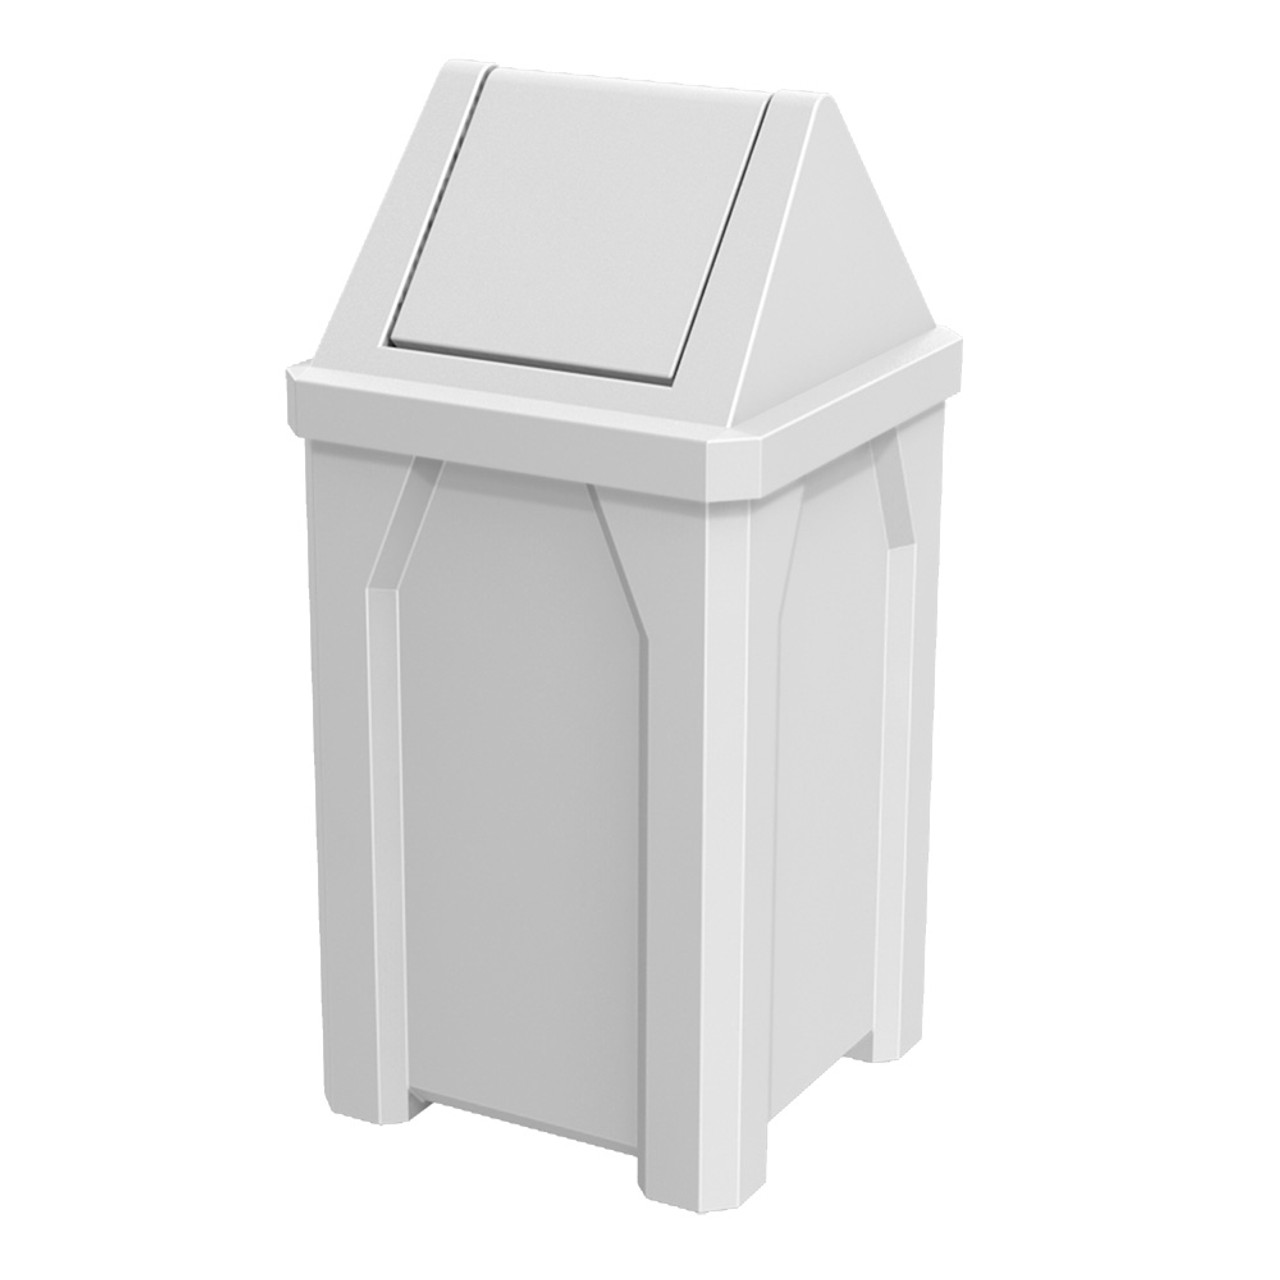 32 gal Square Outdoor Commercial Trash Can, Dome Top Lid, Choose Color -  Orange Traffic Cones